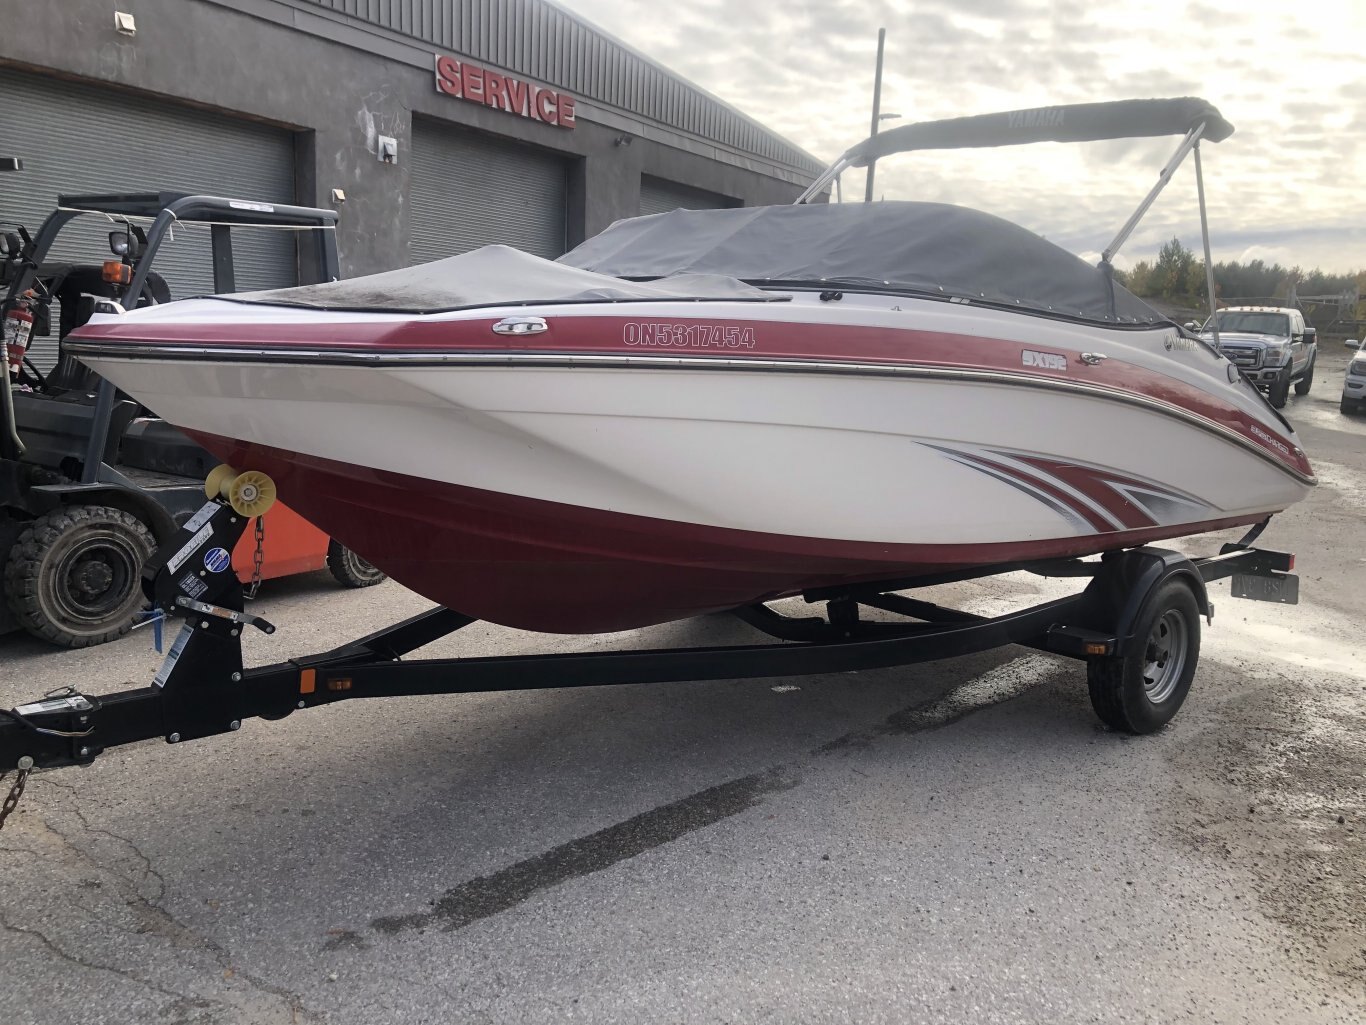 2016 YAMAHA SX192 - Used! Great Find!